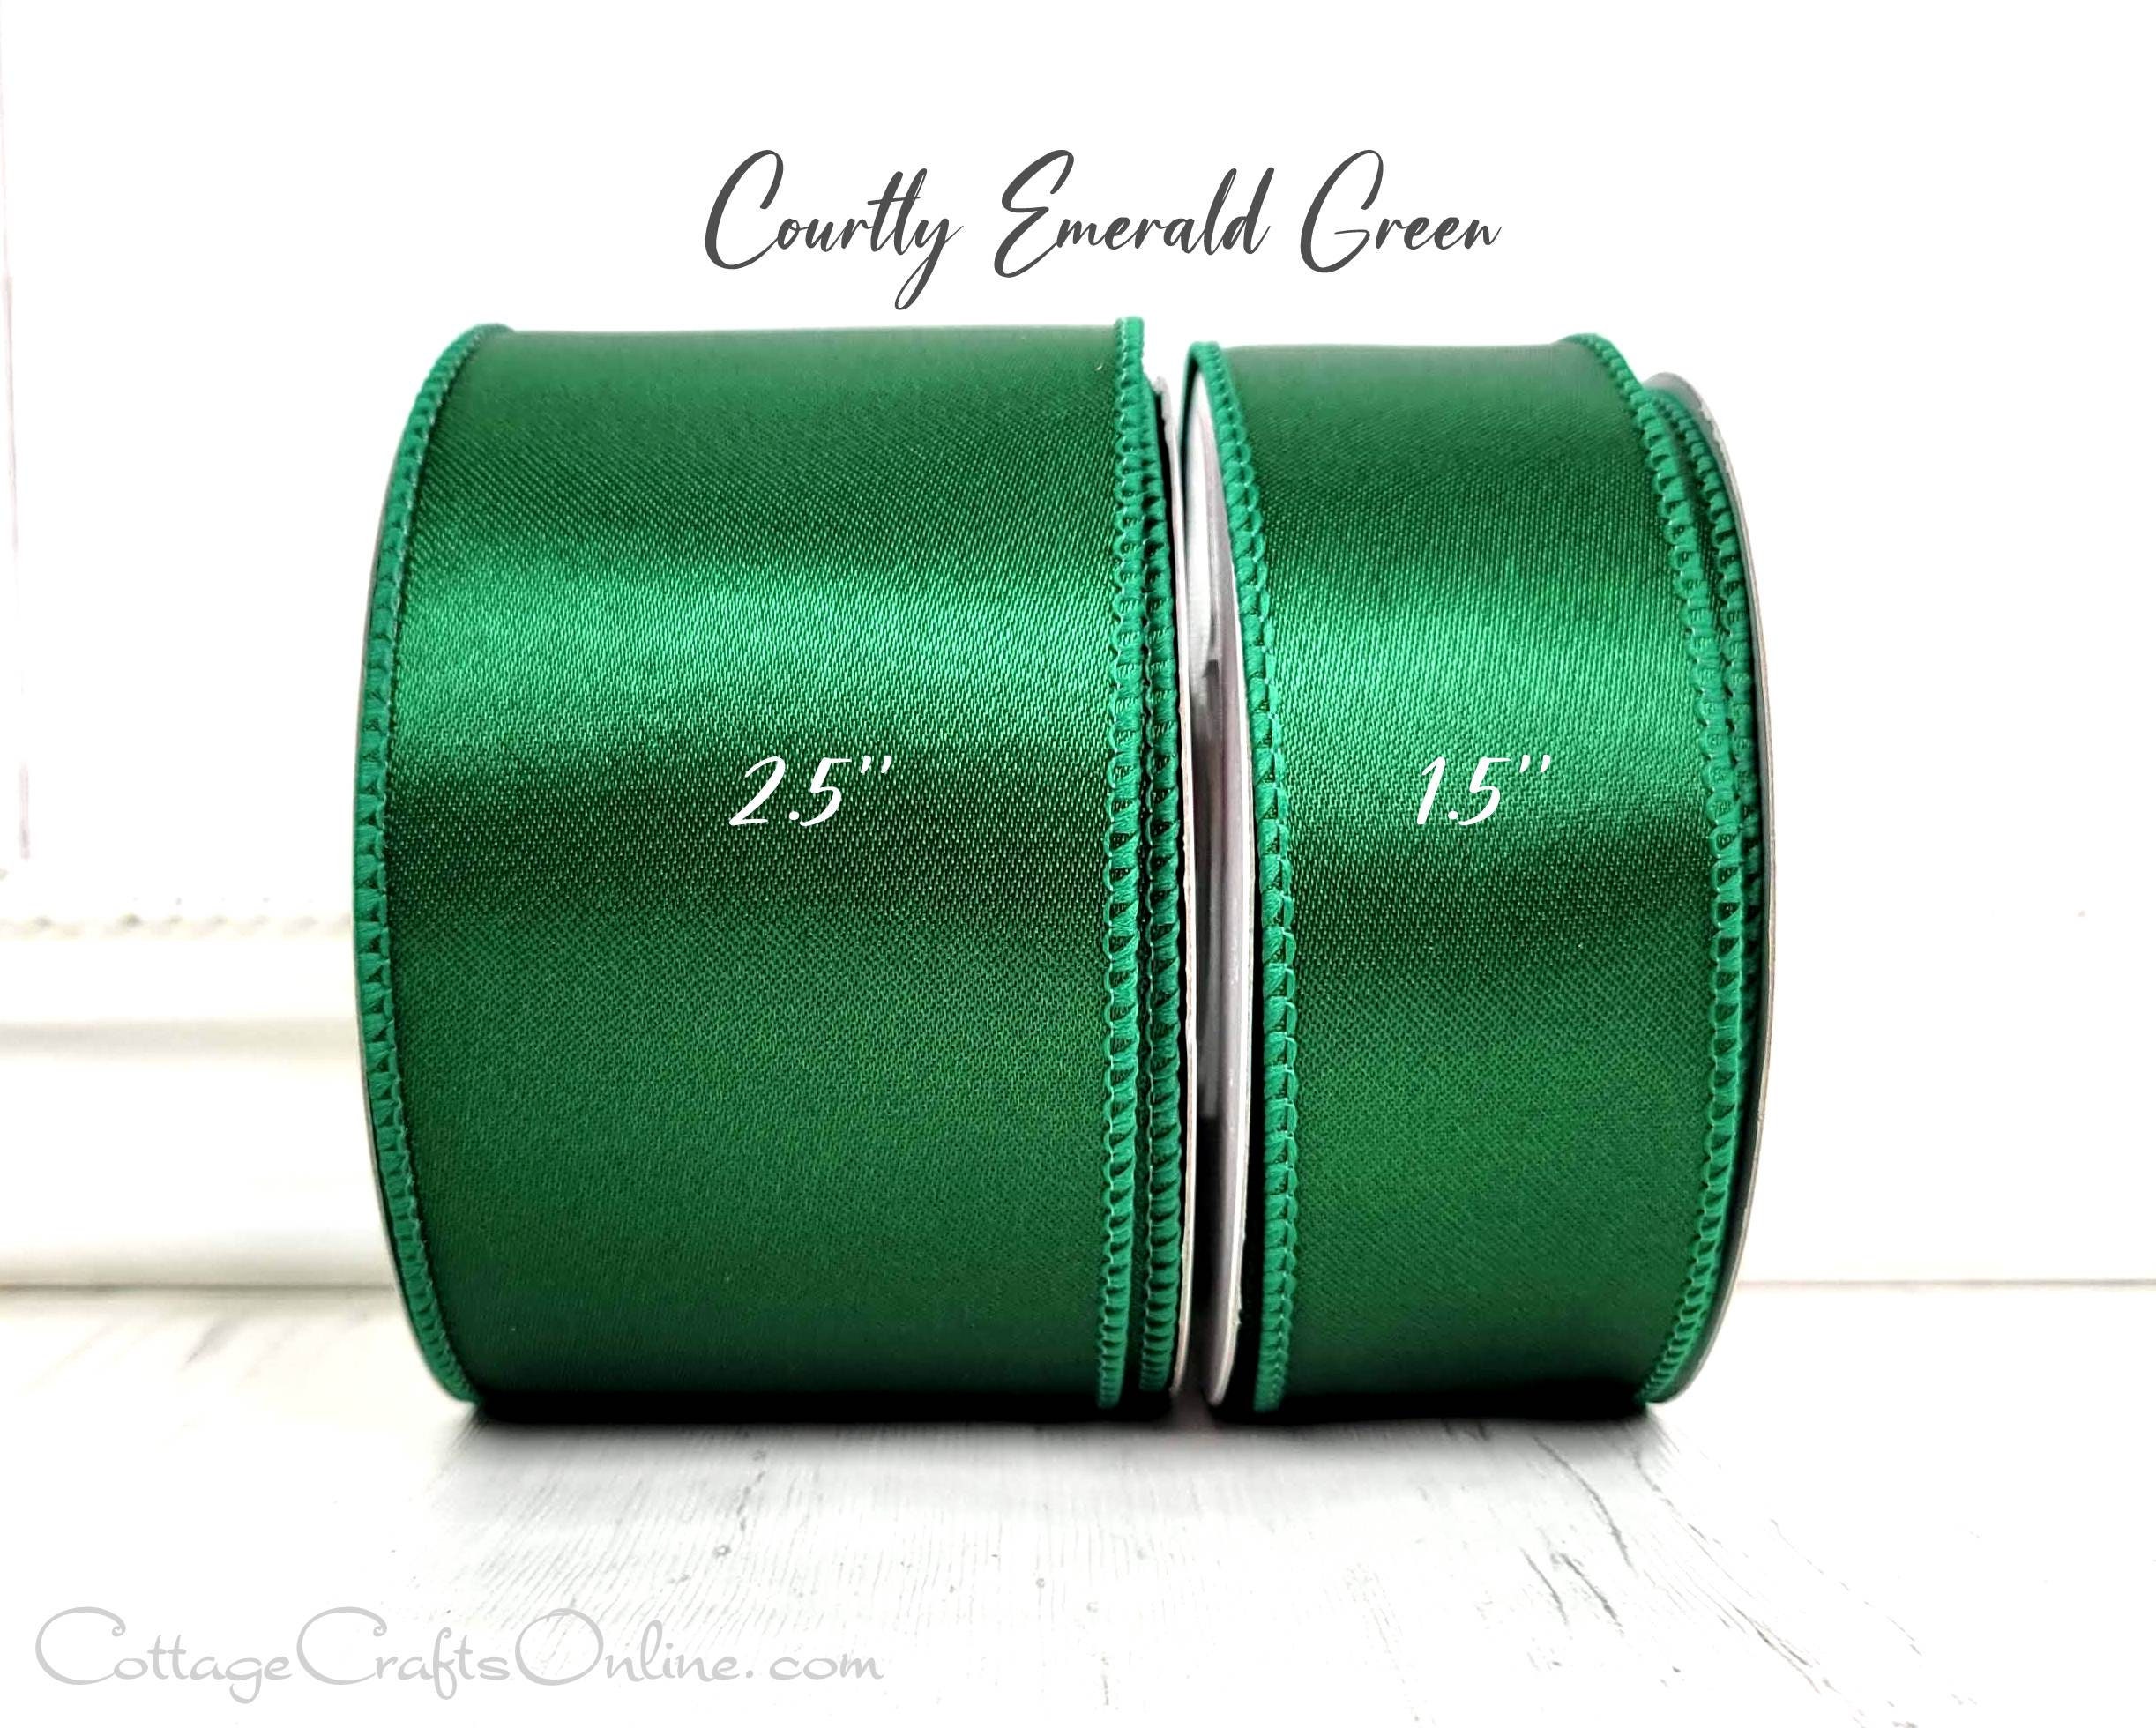 Emerald Green Ribbon, 1 1/2 Wide, Wired Edge, 5 YARDS